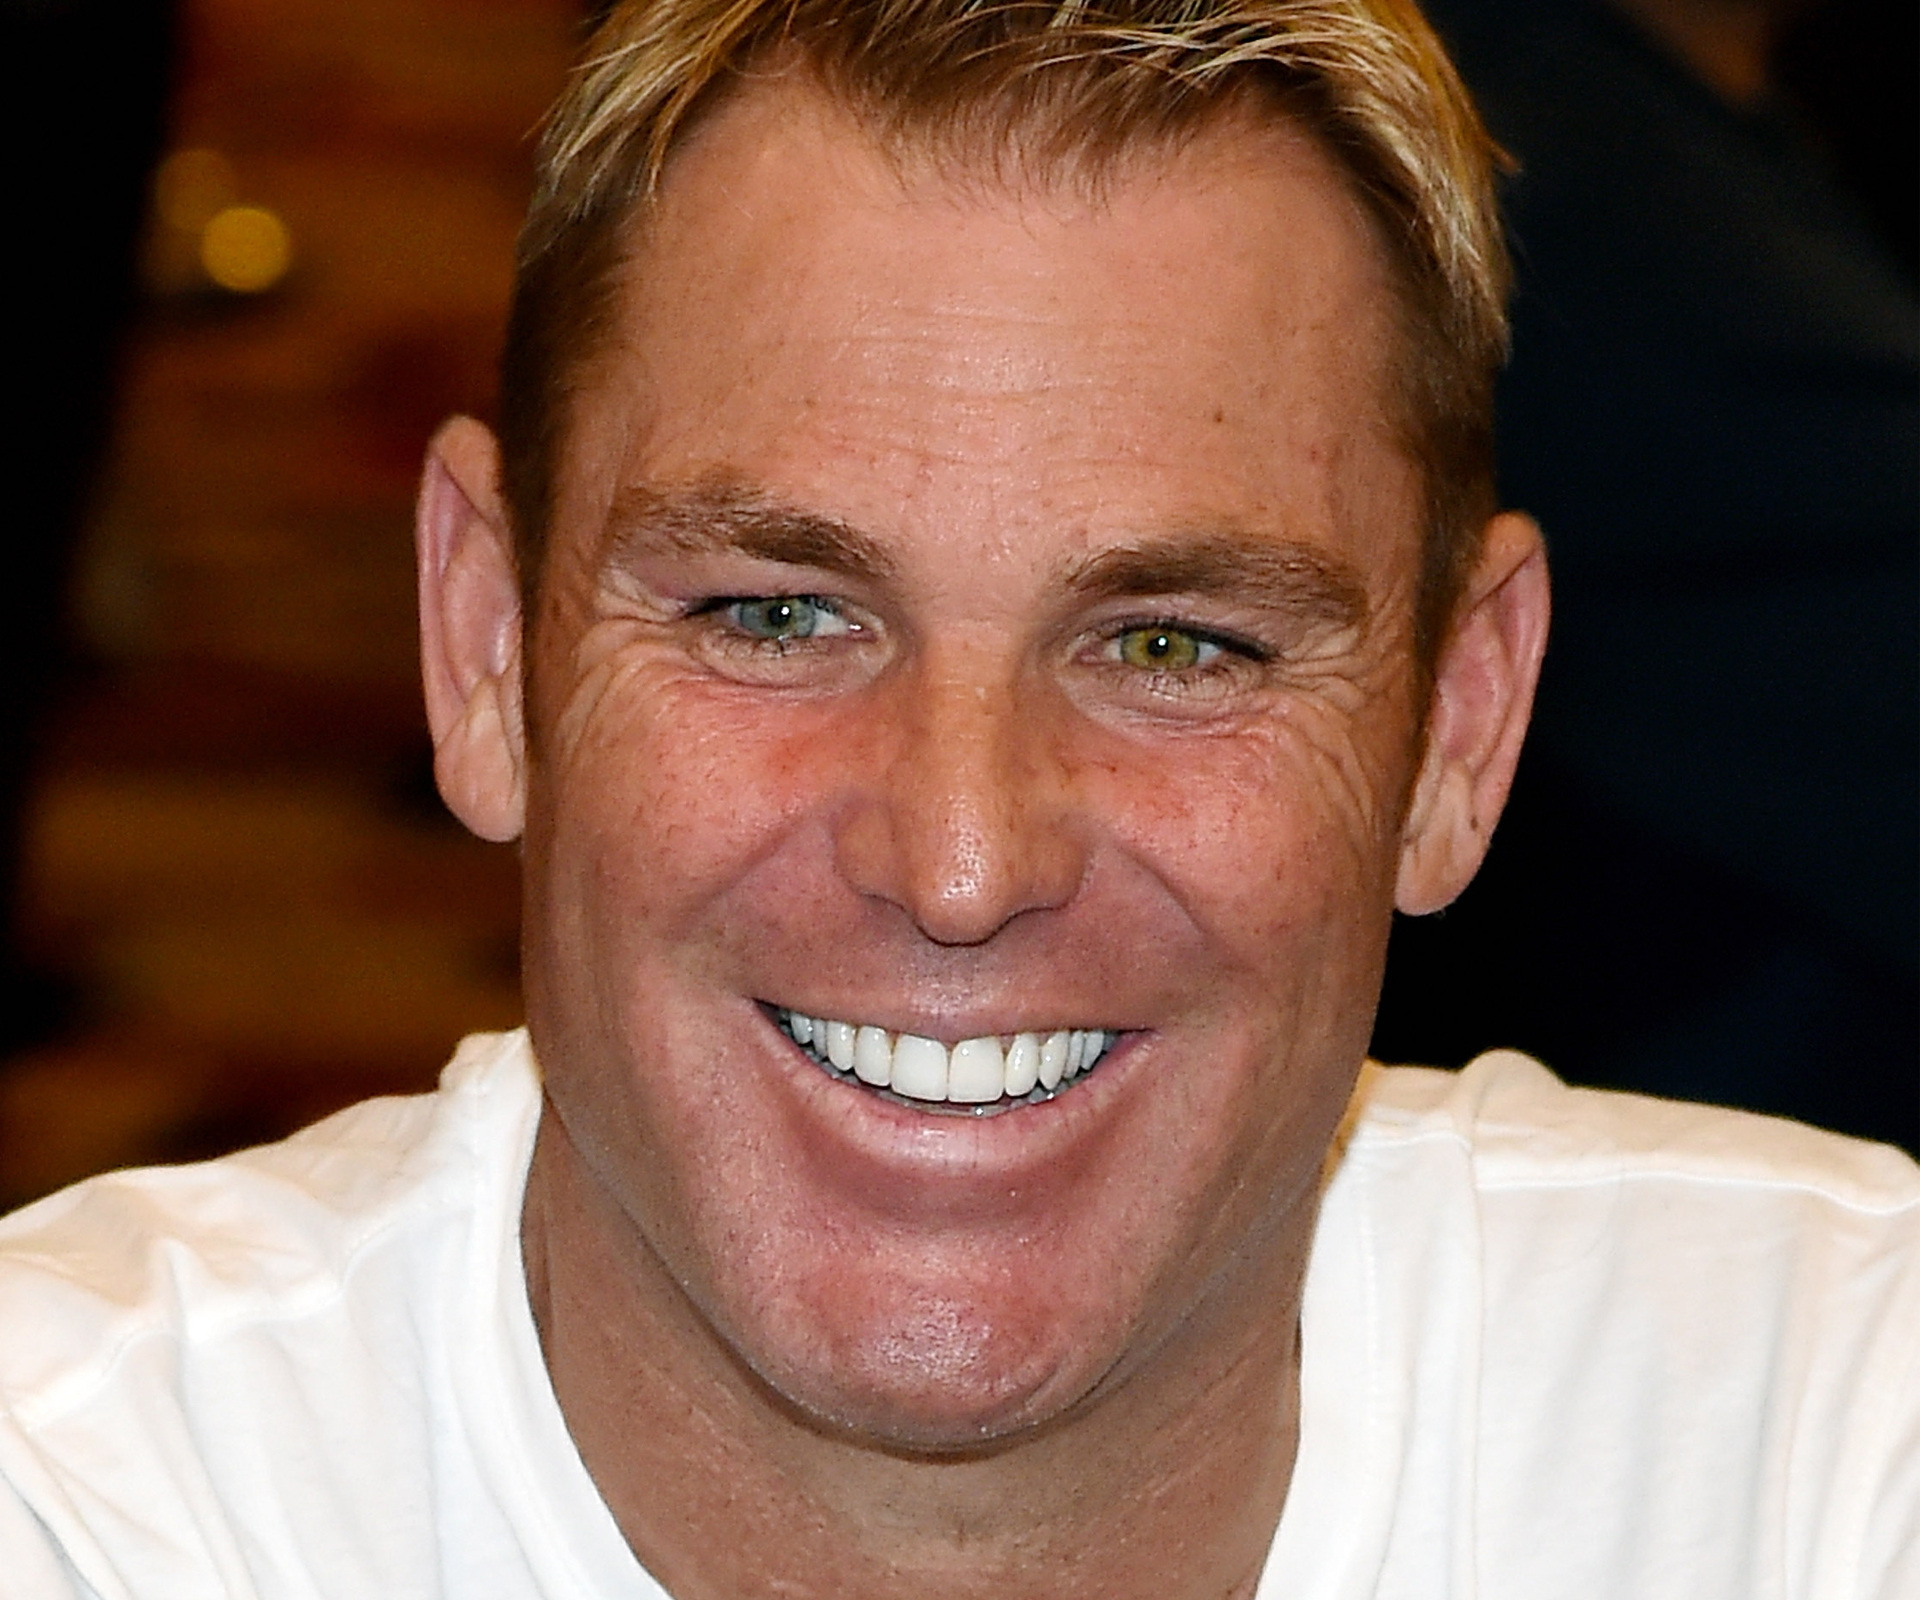 Shane Warne posts photo in attempt to shun plastic surgery rumours